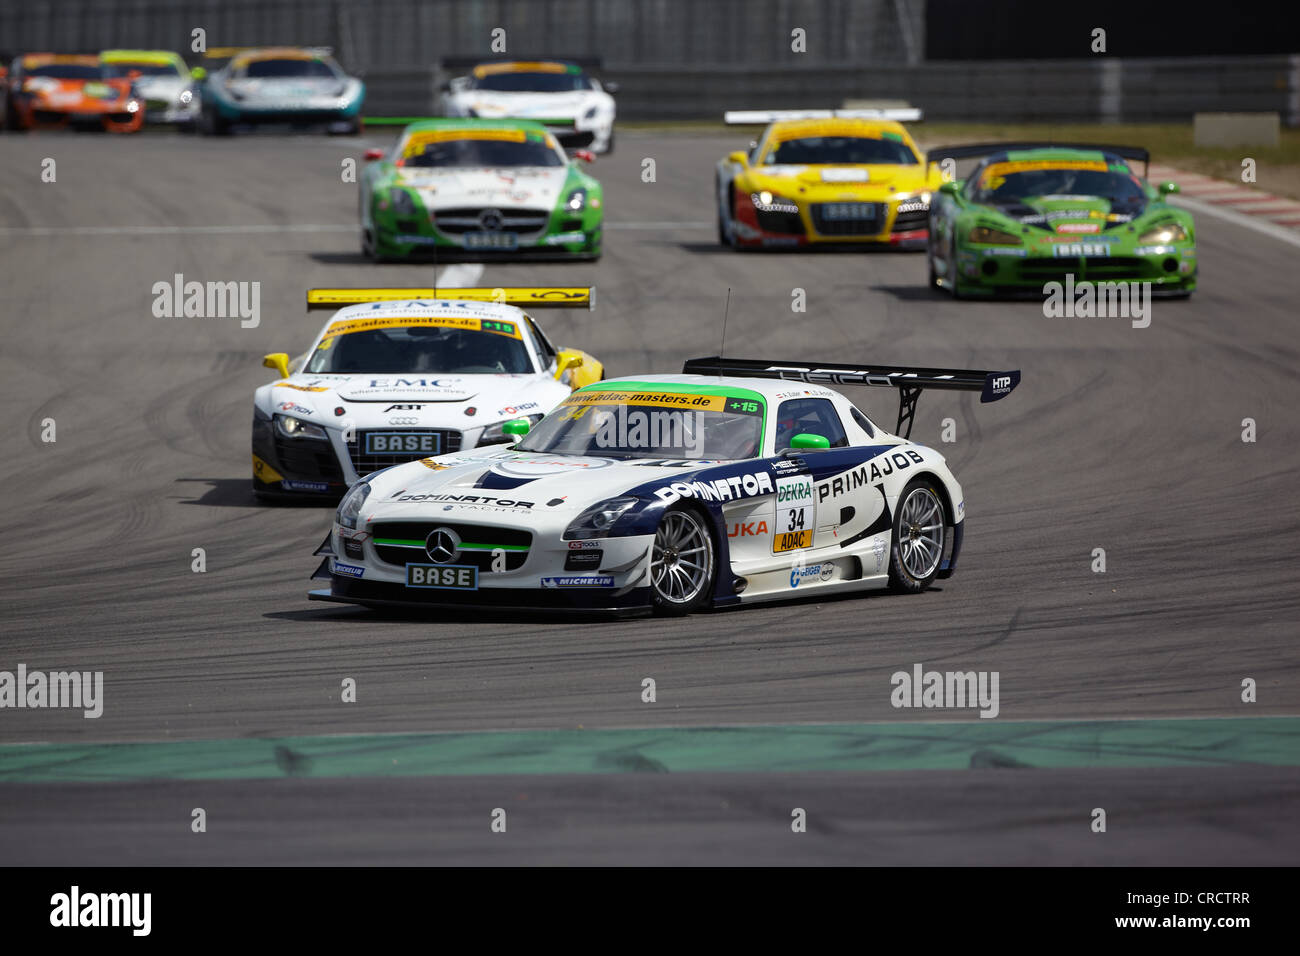 GT Masters race at the Truck Grand Prix on the Nuerburgring race track, Rhineland-Palatinate, Germany, Europe Stock Photo